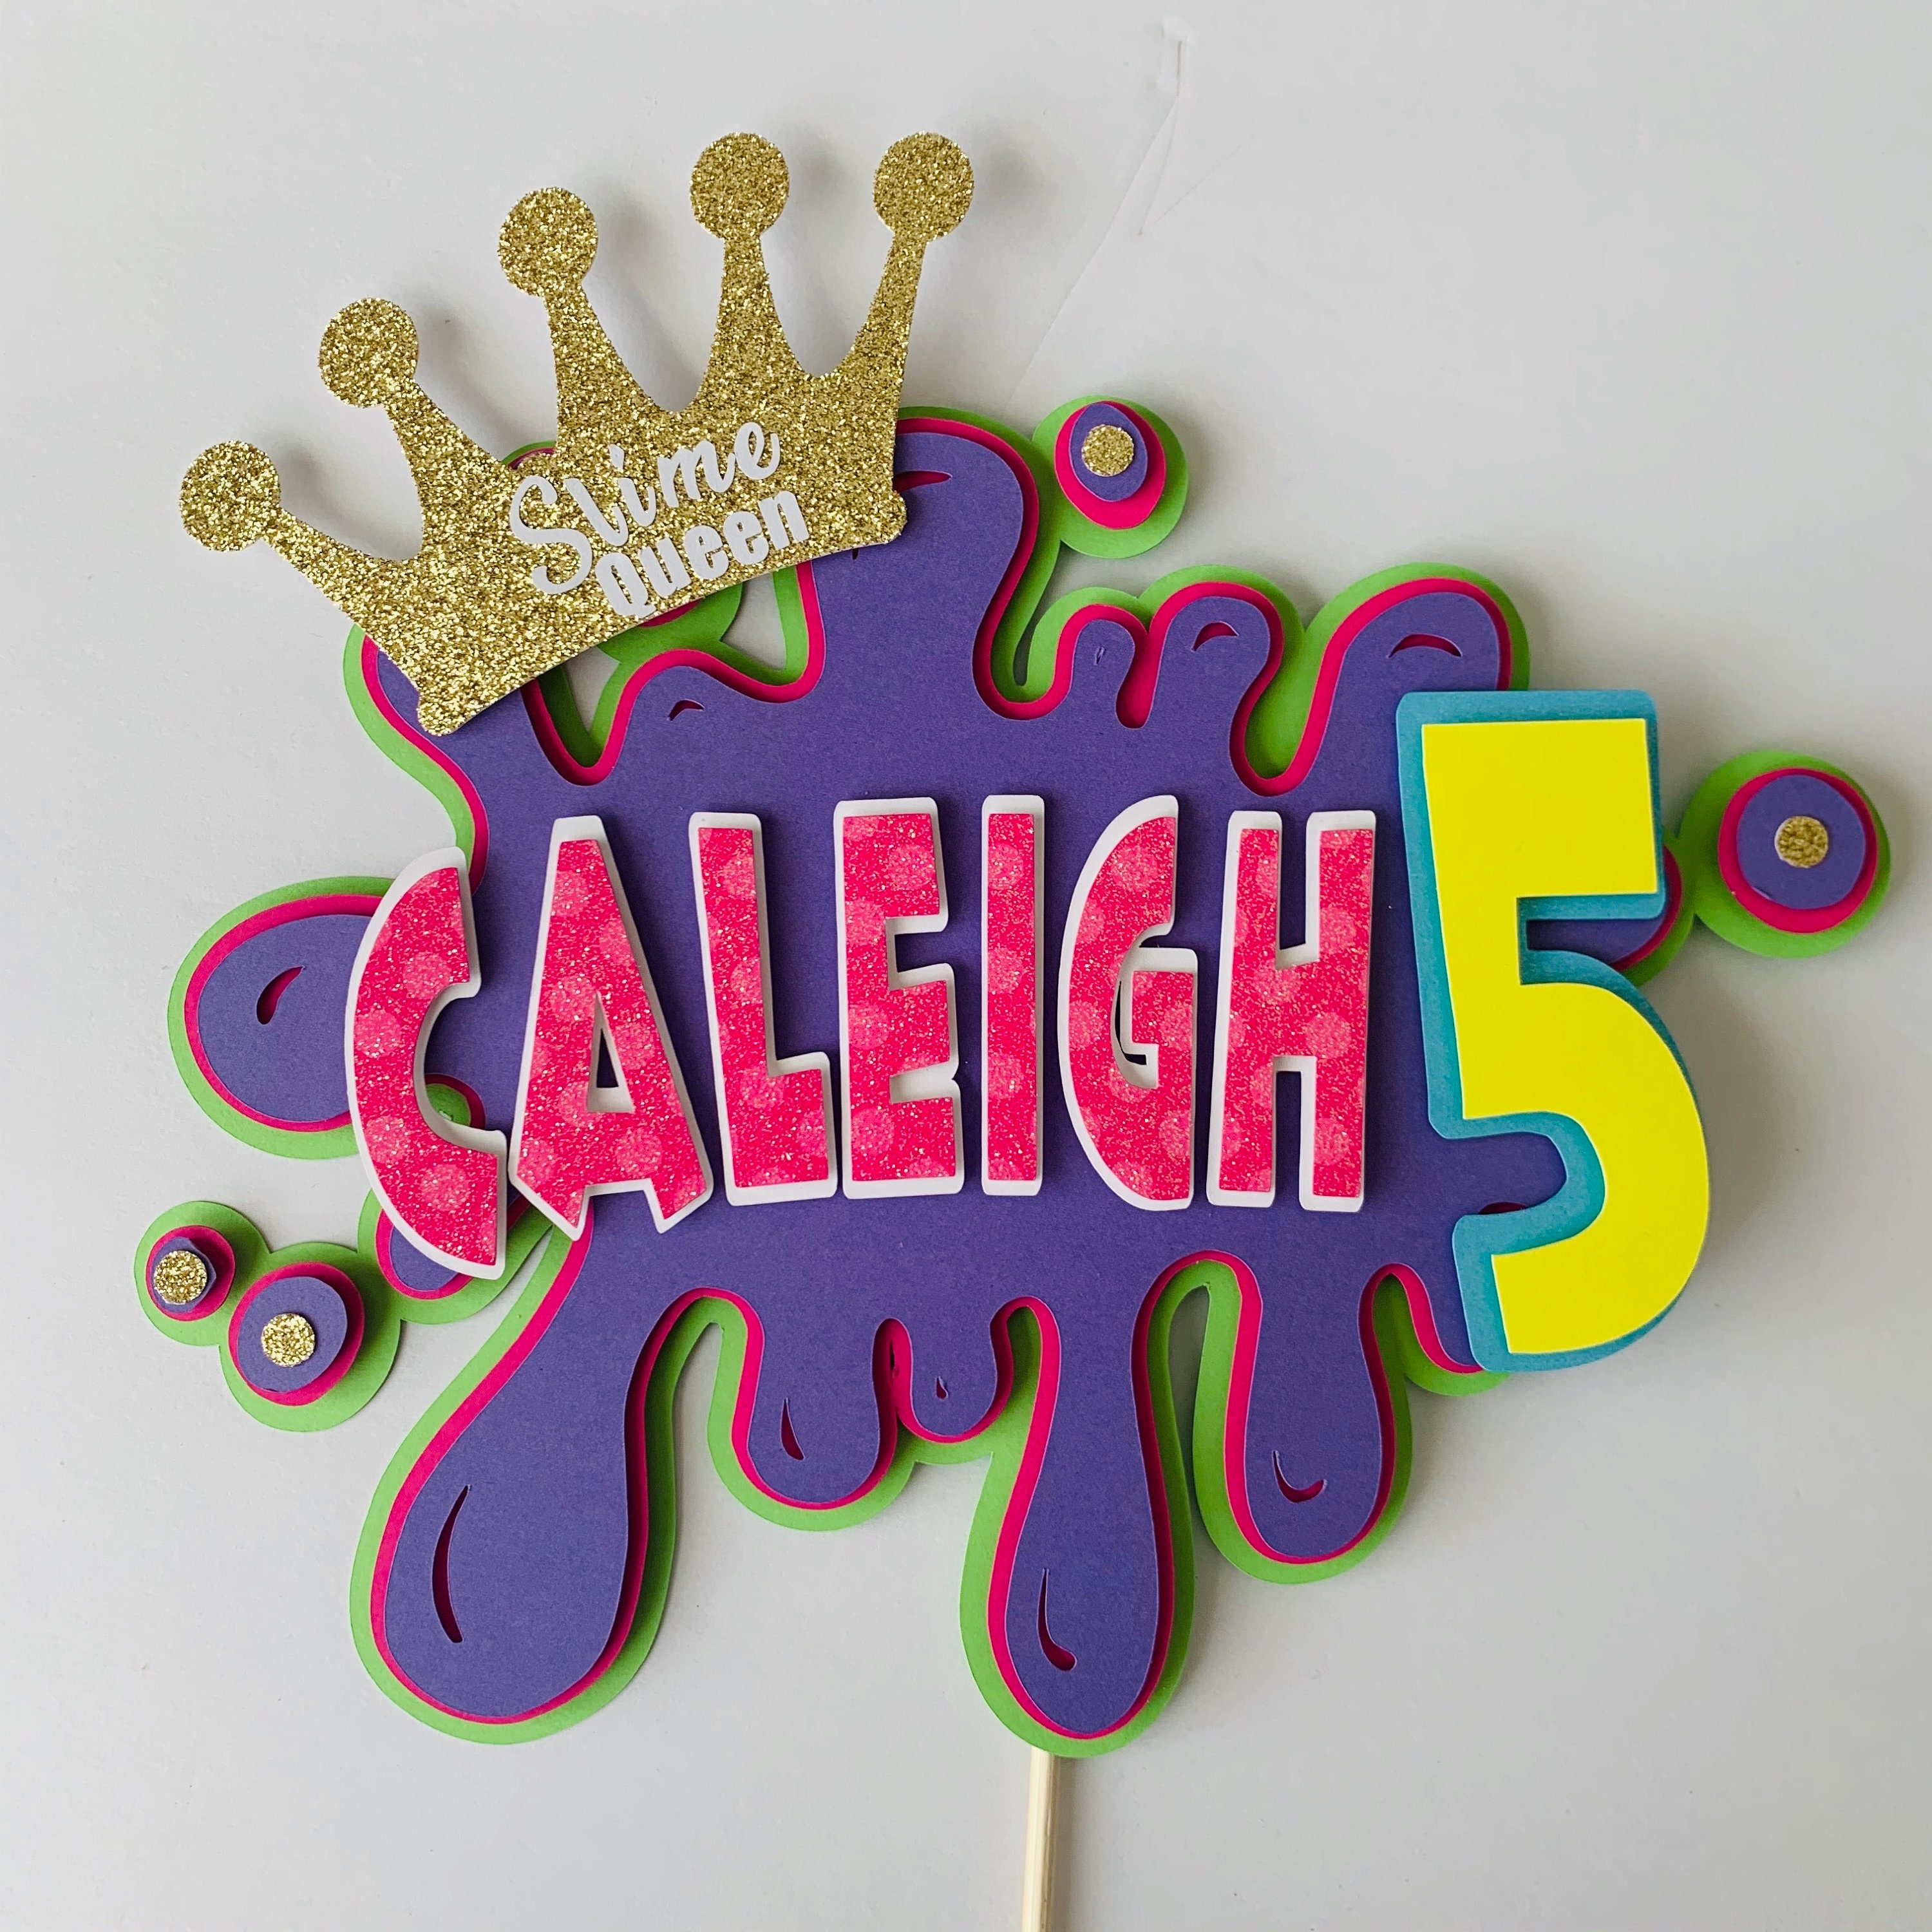 Slime Cake Topper / Slime Queen Cake Topper / Slime Party / Slime Birthday  Decorations / Slime Decorations / Slime Party Supplies 